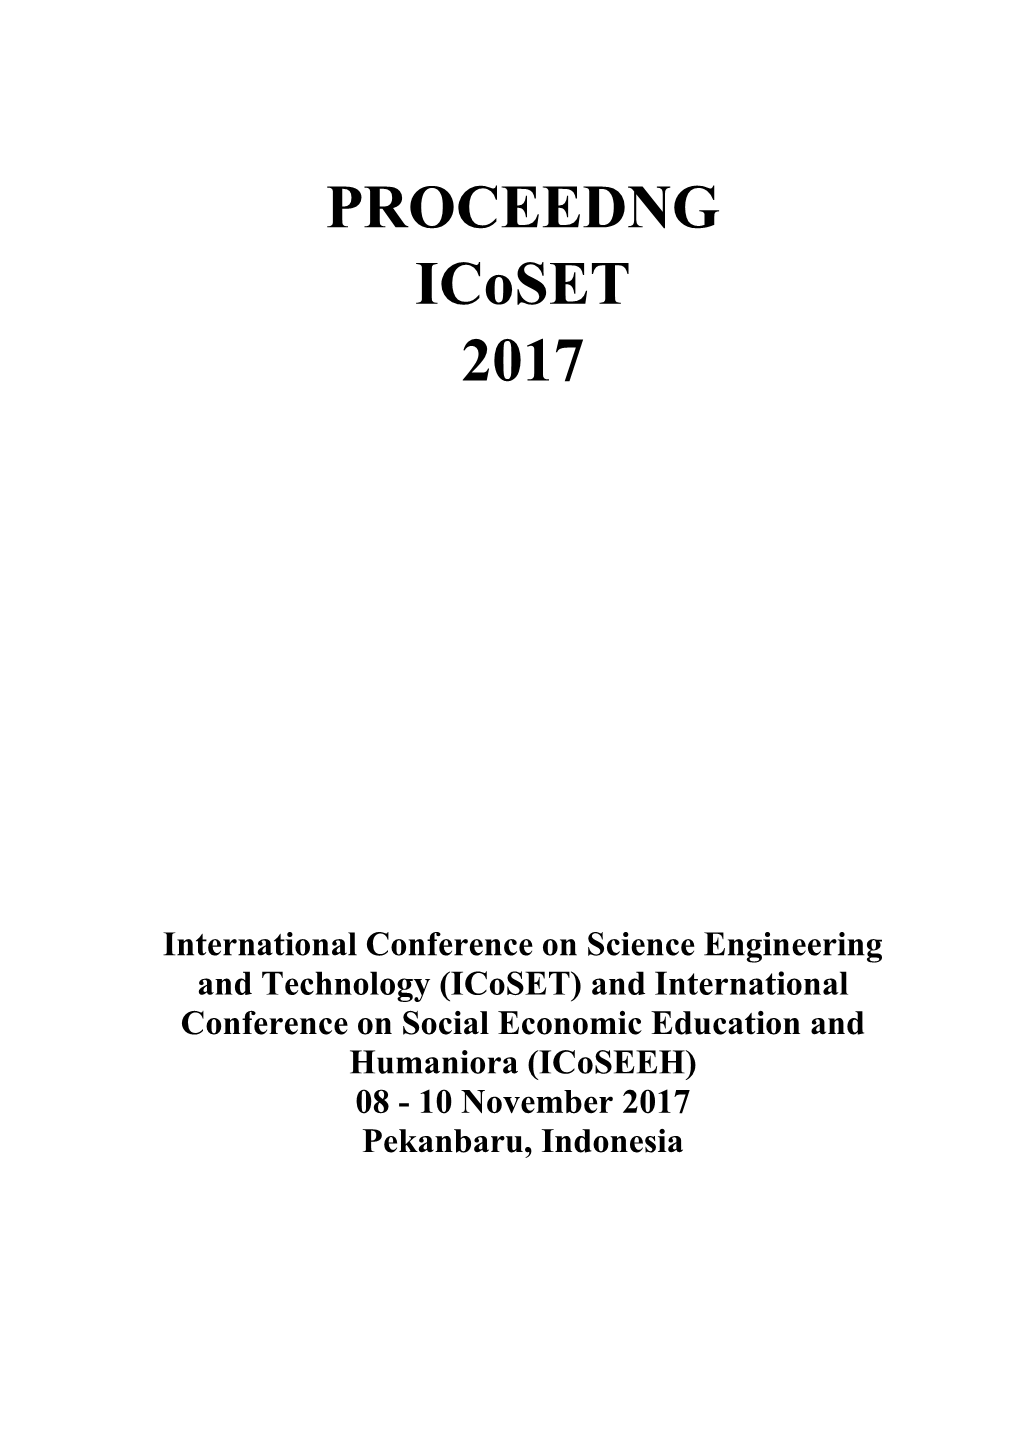 PROCEEDNG Icoset 2017